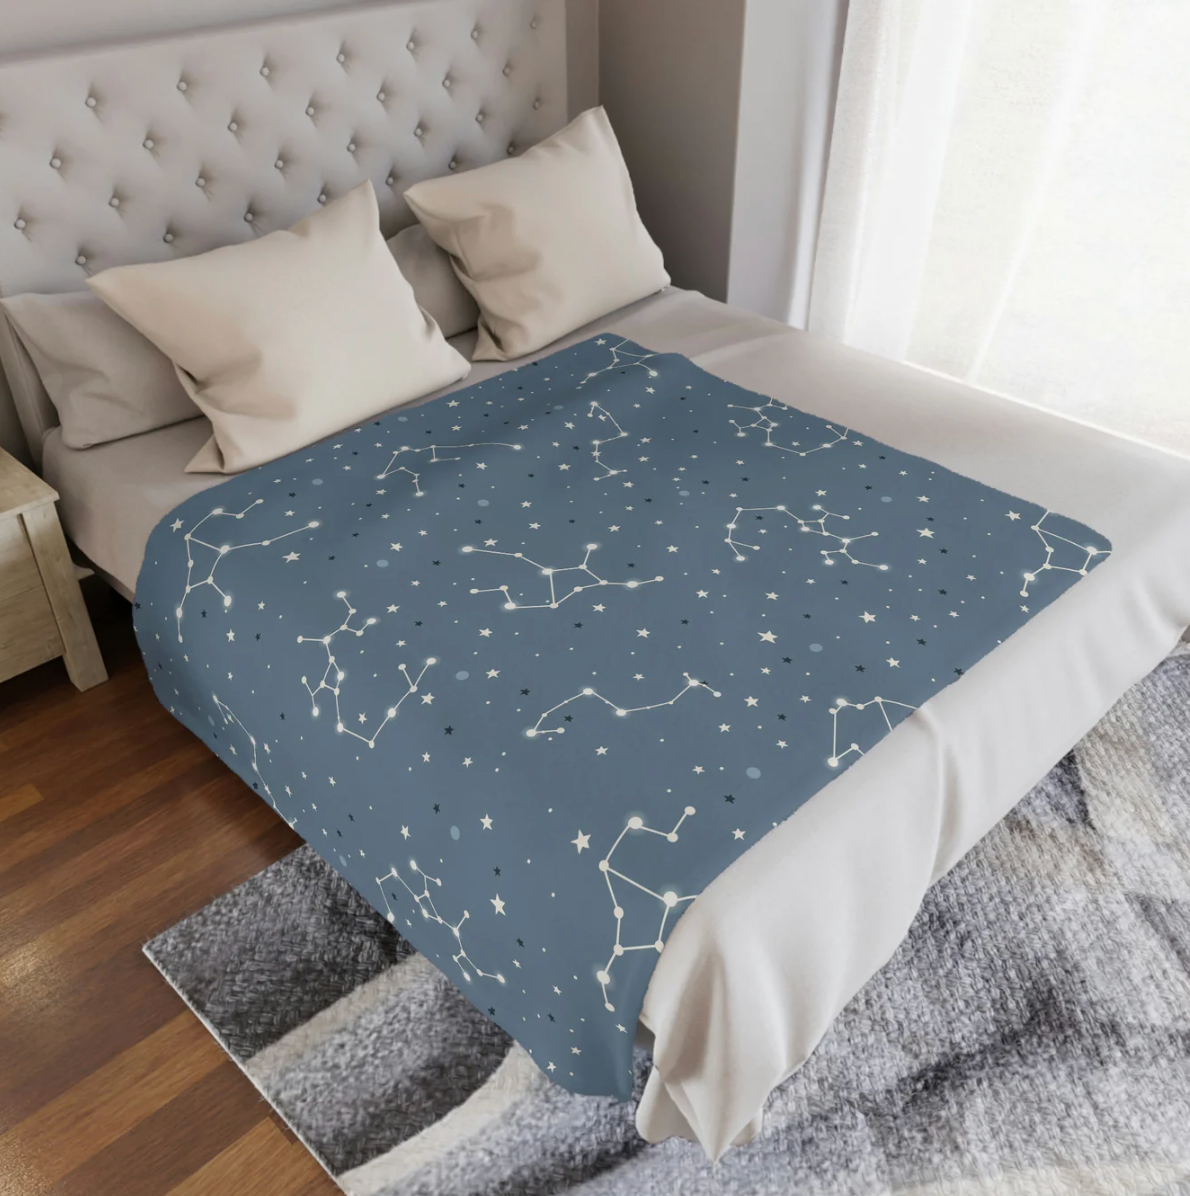 space theme nursery, space theme baby blanket, space theme baby shower gift, space plush throw blanket